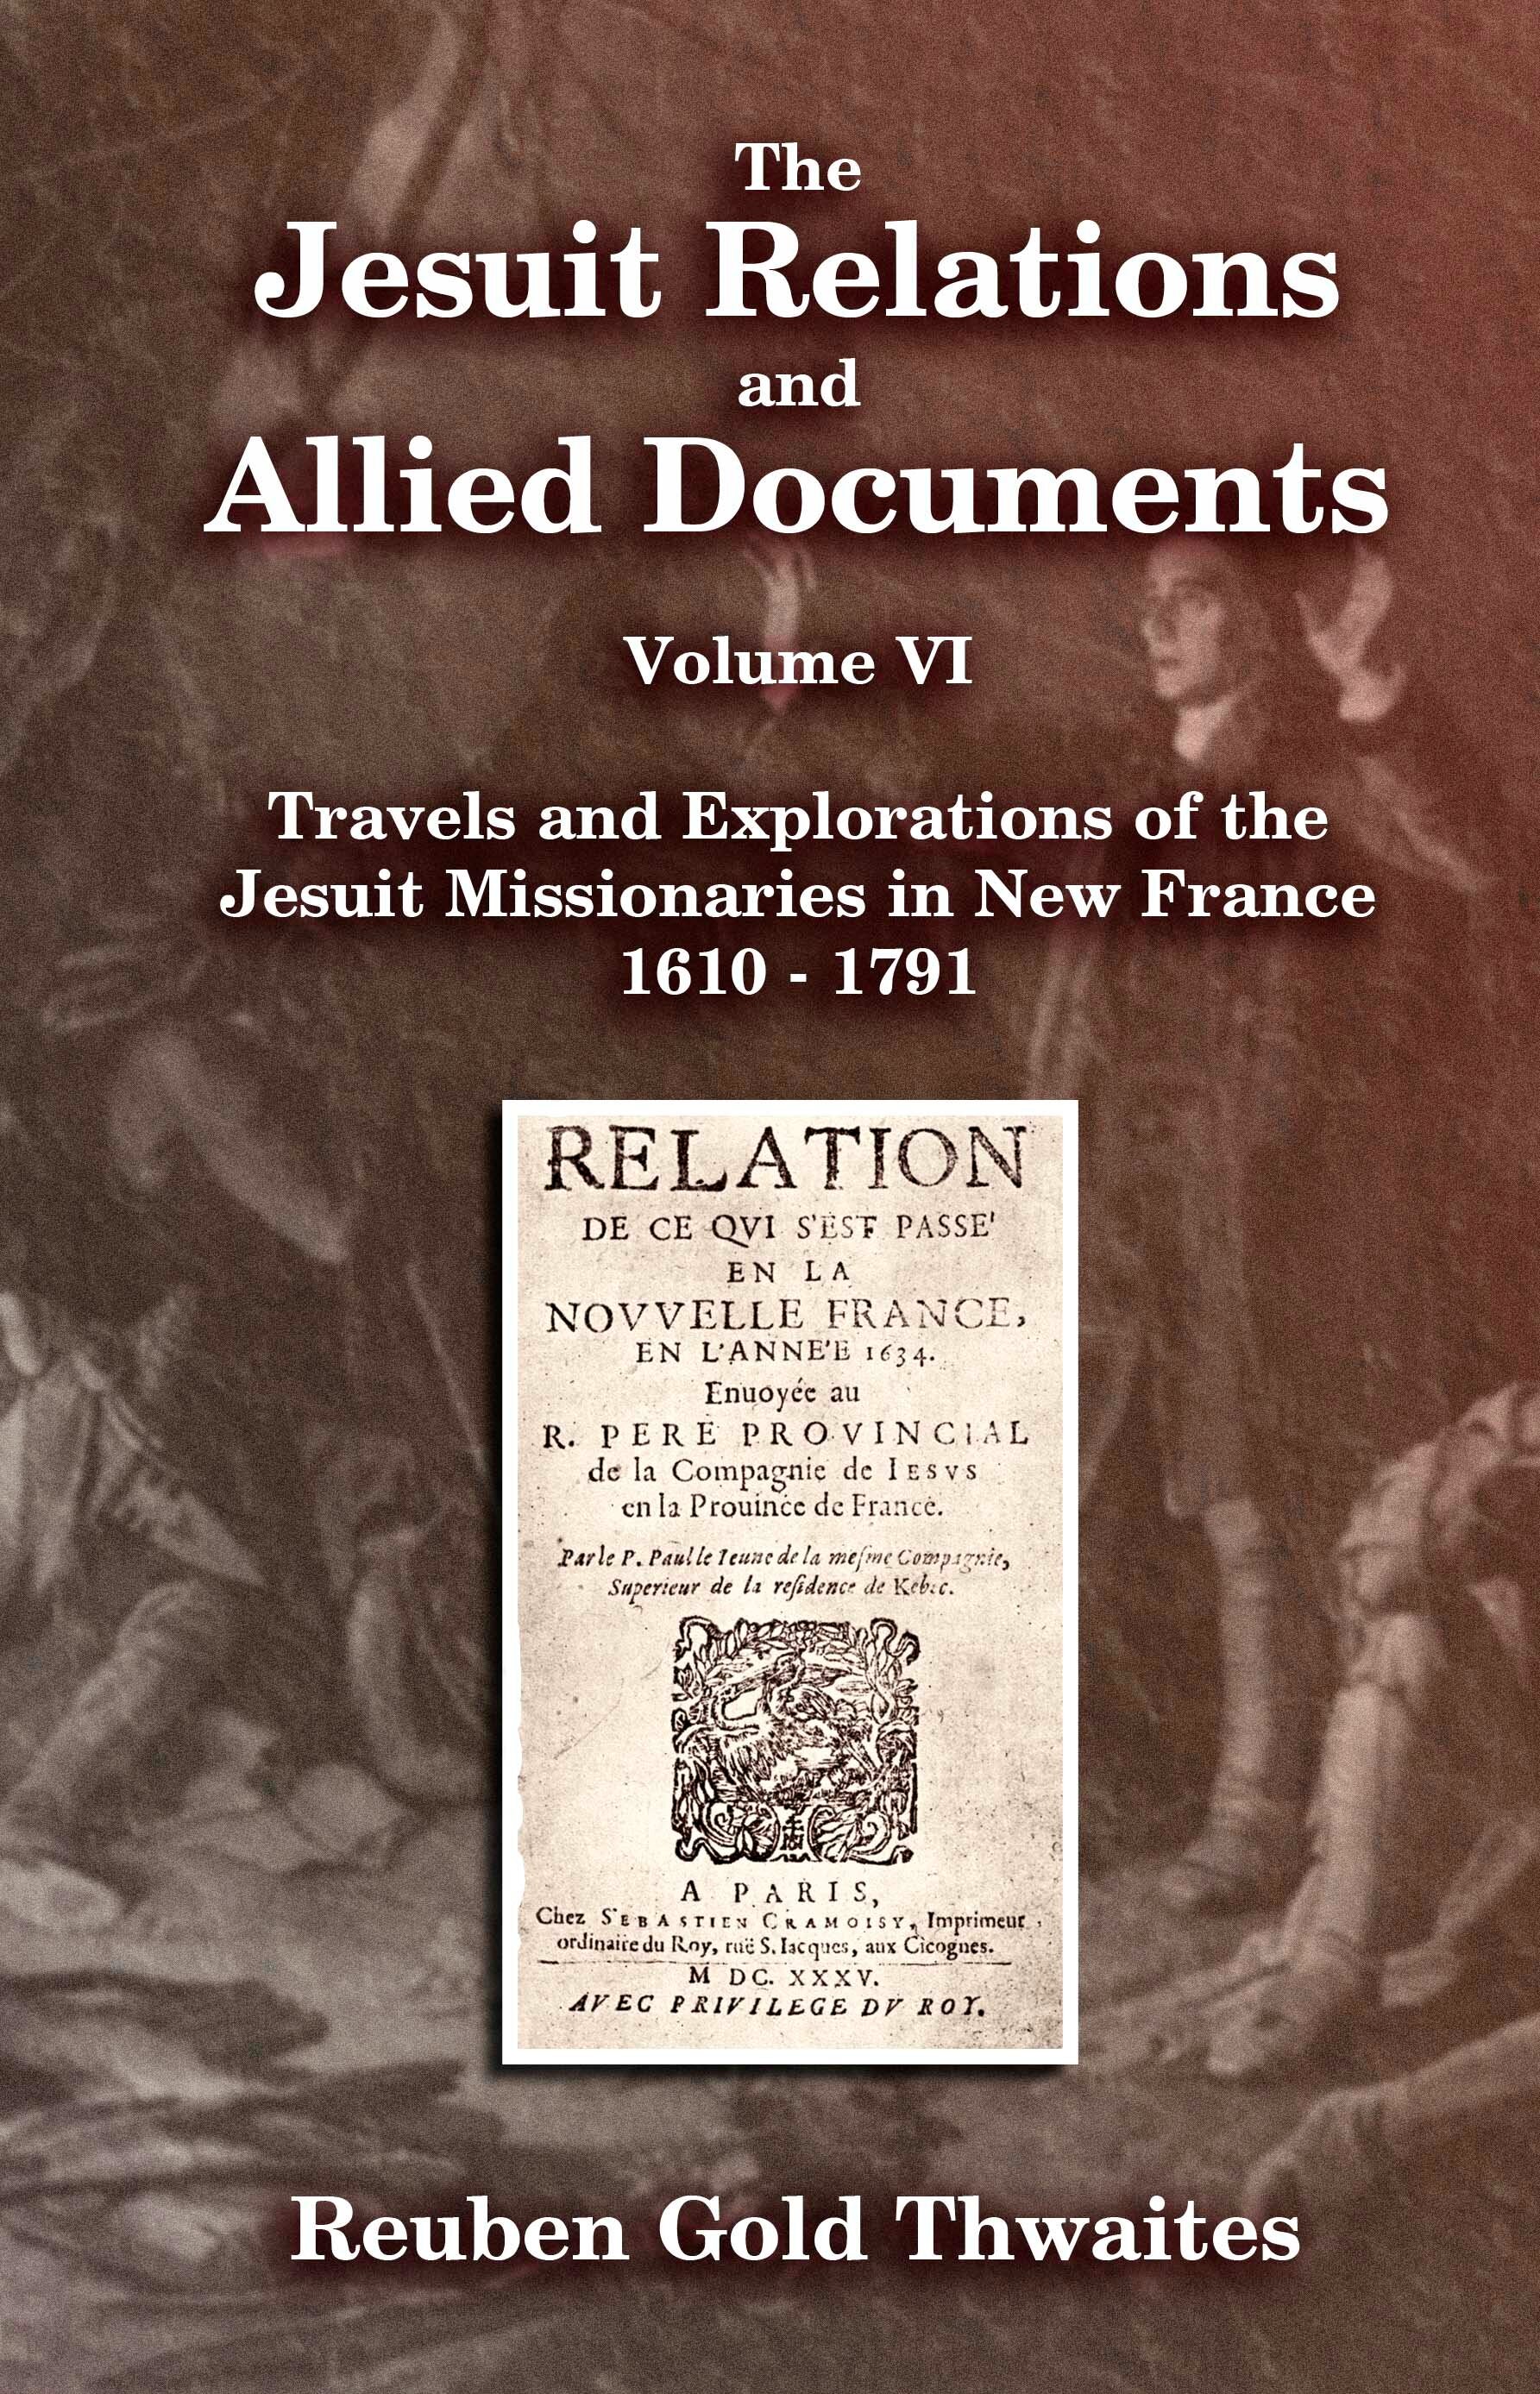 The Jesuit Relations and Allied Documents, Travels and Explorations of the Jesuit Missionaries in New France 1610 - 1791 Volume VI